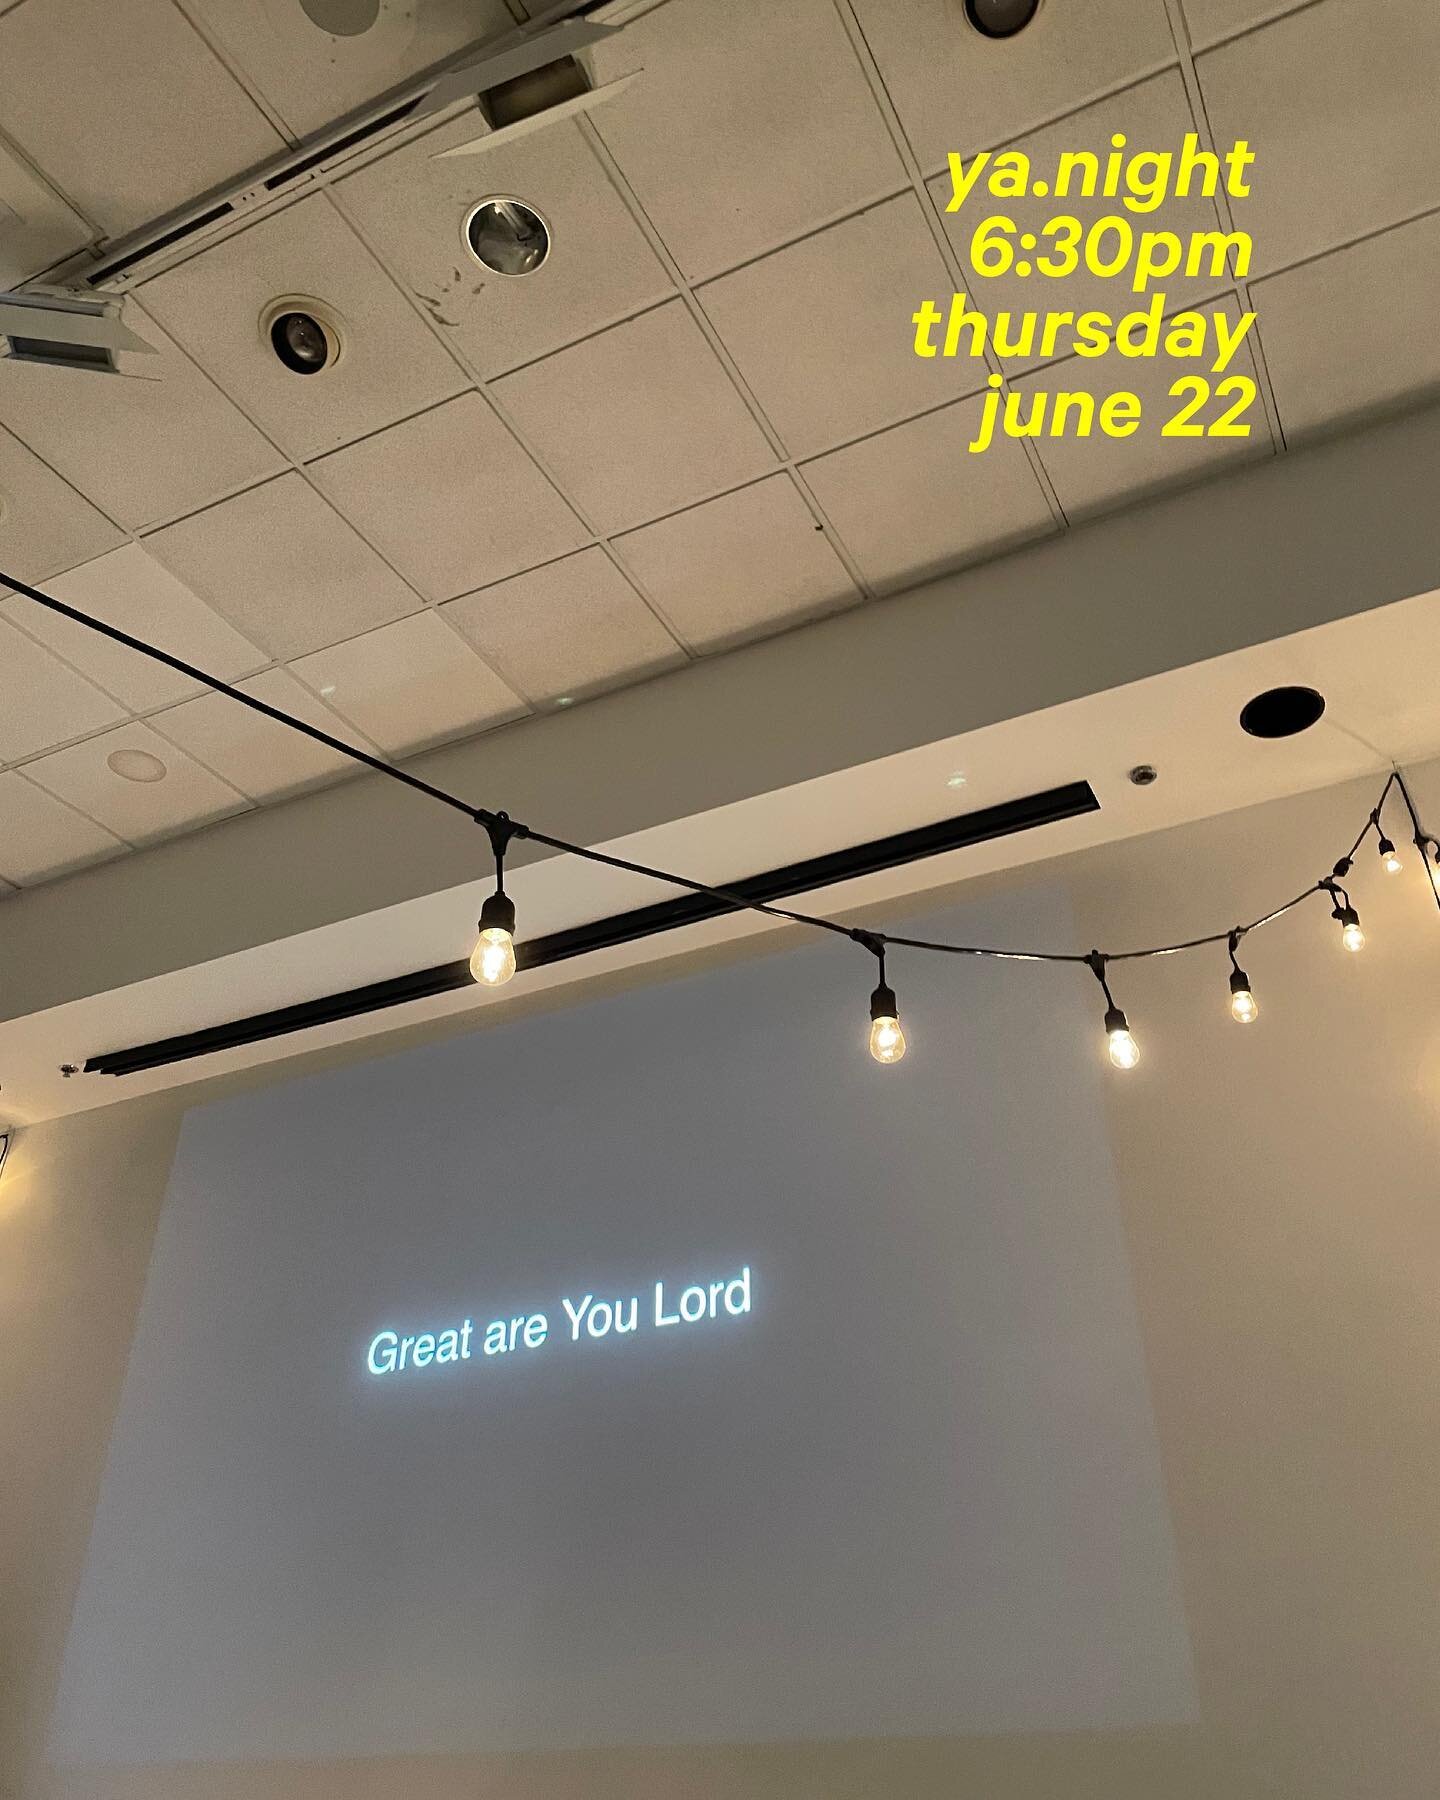 it&rsquo;s officially june!

and that means our next ya.night is just a few weeks away&hellip;.join us at 6:30pm thursday, June 22 for worship and a word from our very own ya.leader &mdash; @_matthewleach ! 

we can&rsquo;t wait to see you ;)

deets 